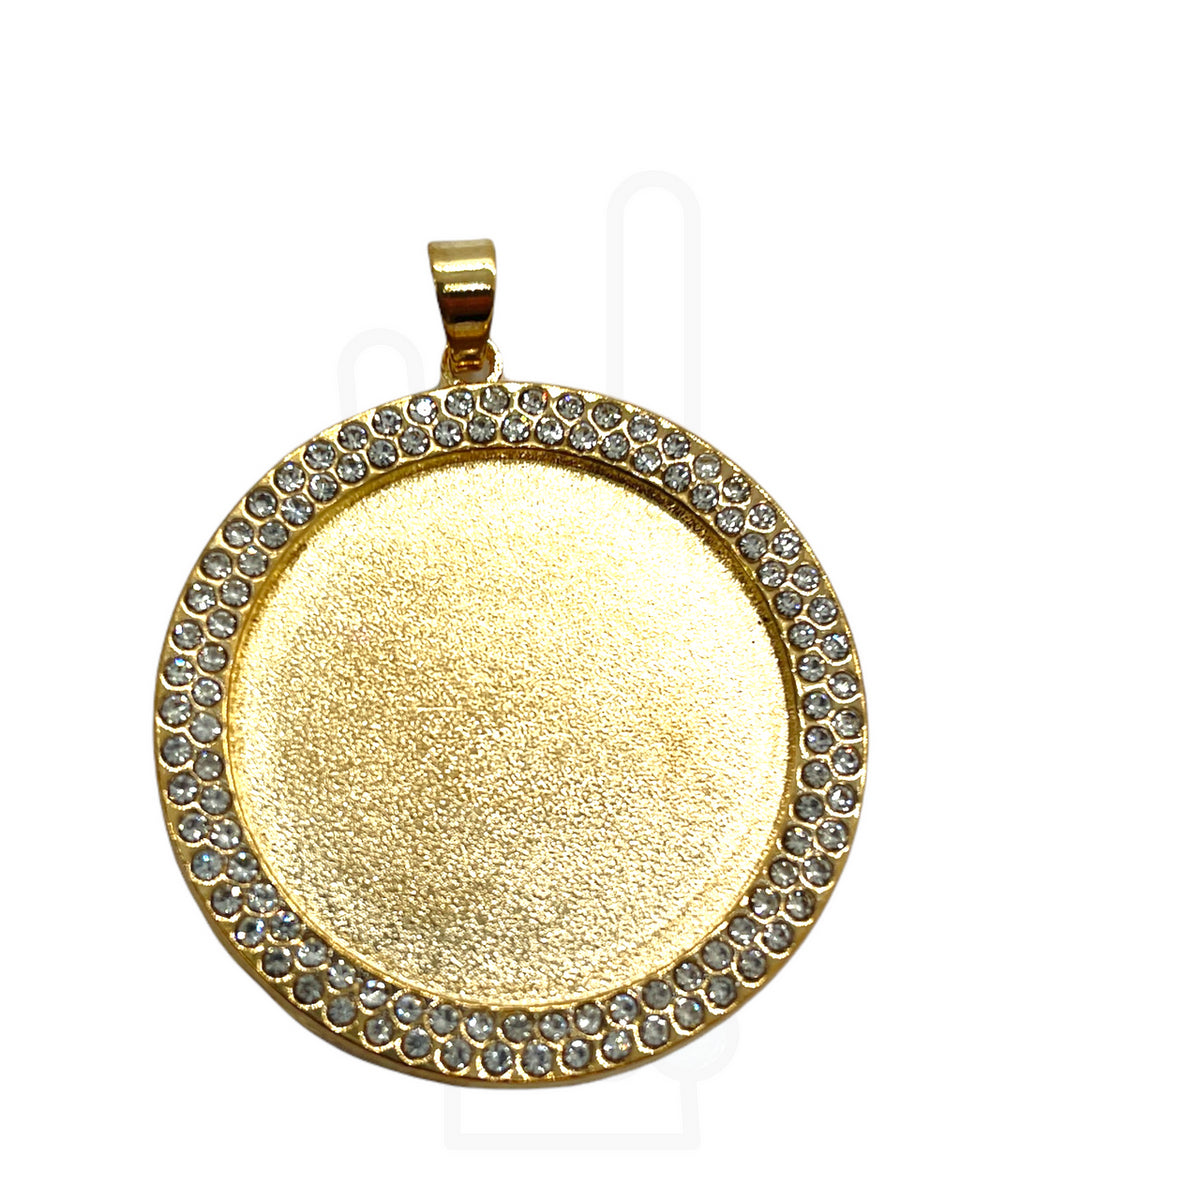 30mm Round Bezel with Rhinestones &amp; Pinch Clips Pendant Blank for UV or Epoxy Resin